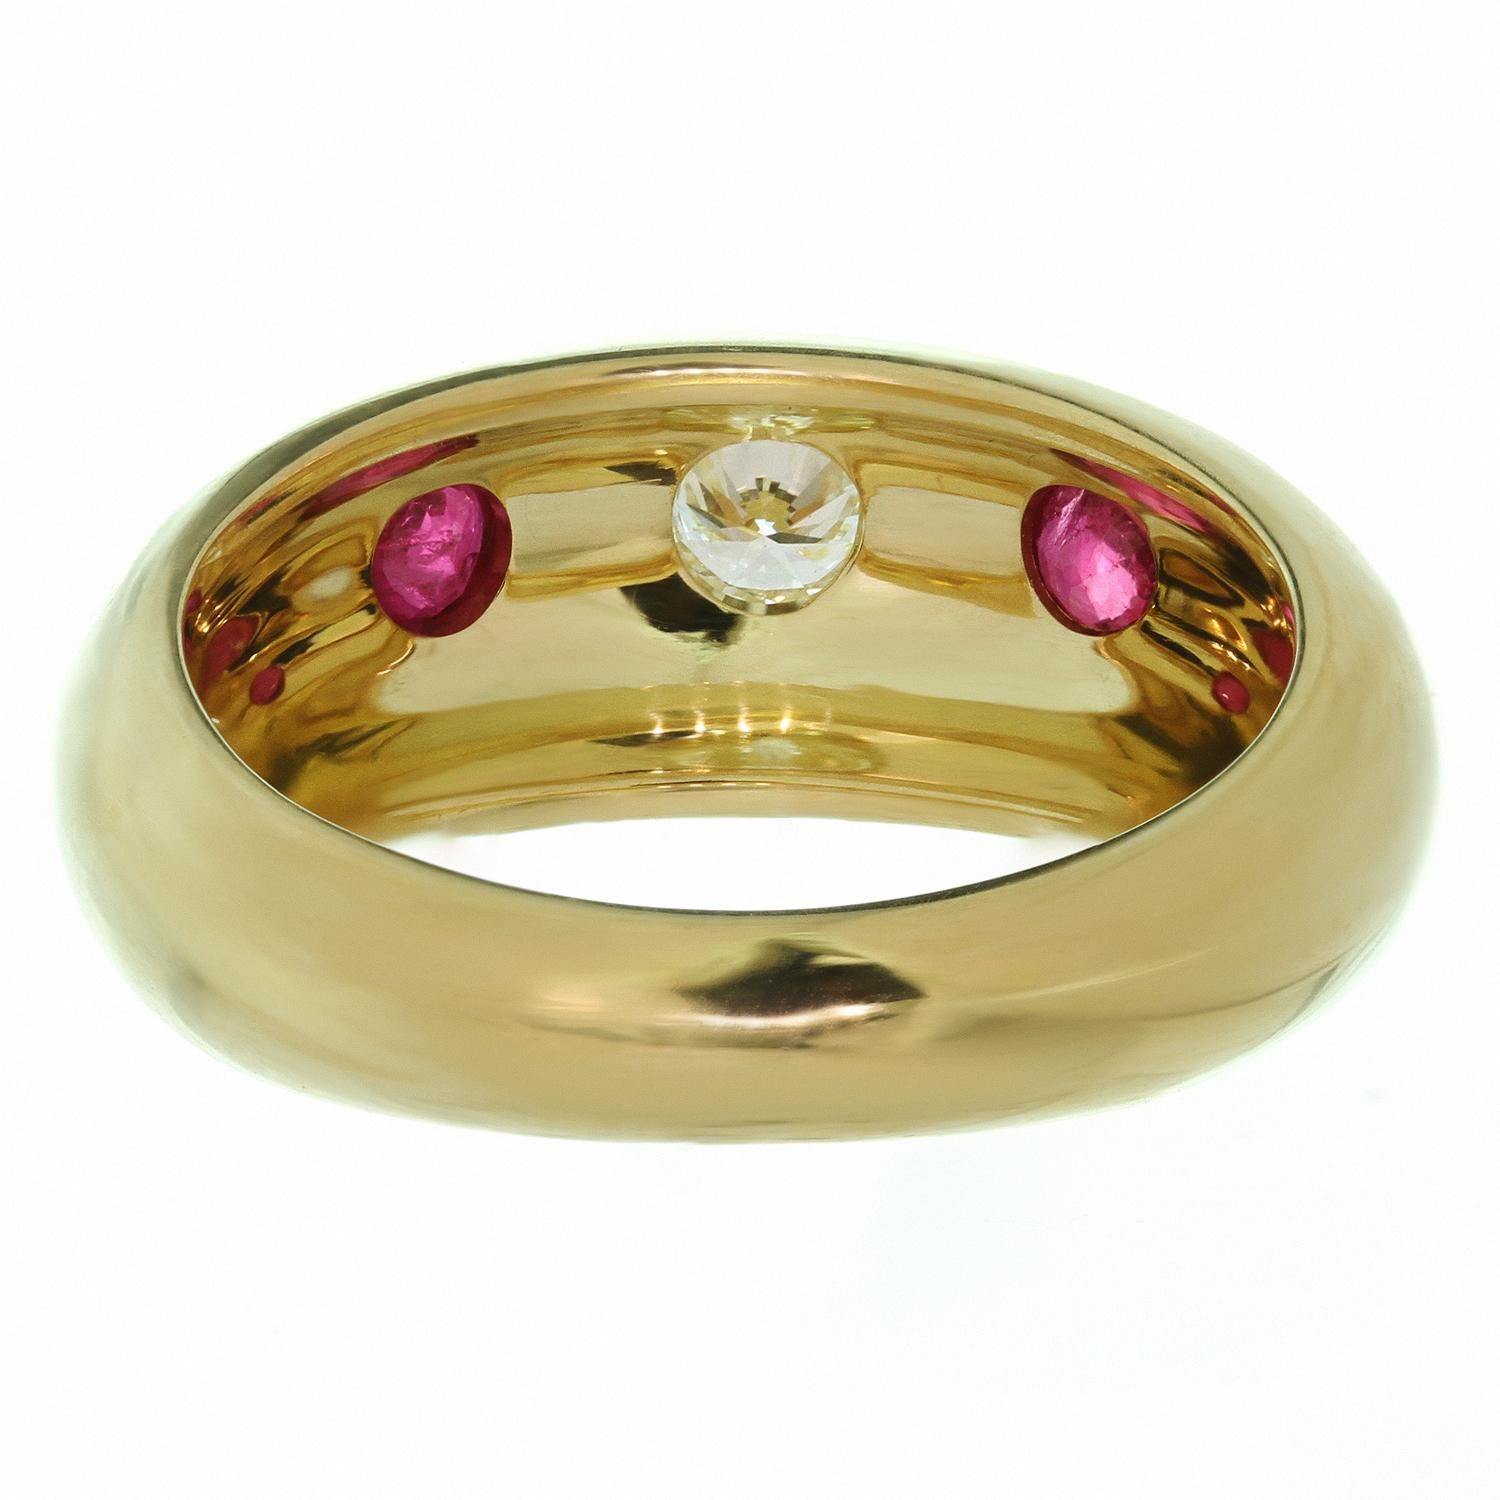 This chic Cartier Bombé band is crafted in 18k yellow gold and set an estimated 0.16 carat brilliant-cut round F-G VVS2-VS1 diamond and a pair of round rubies weighing an estimated 0.16 carats. The ring is signed Cartier and numbered. Made in France